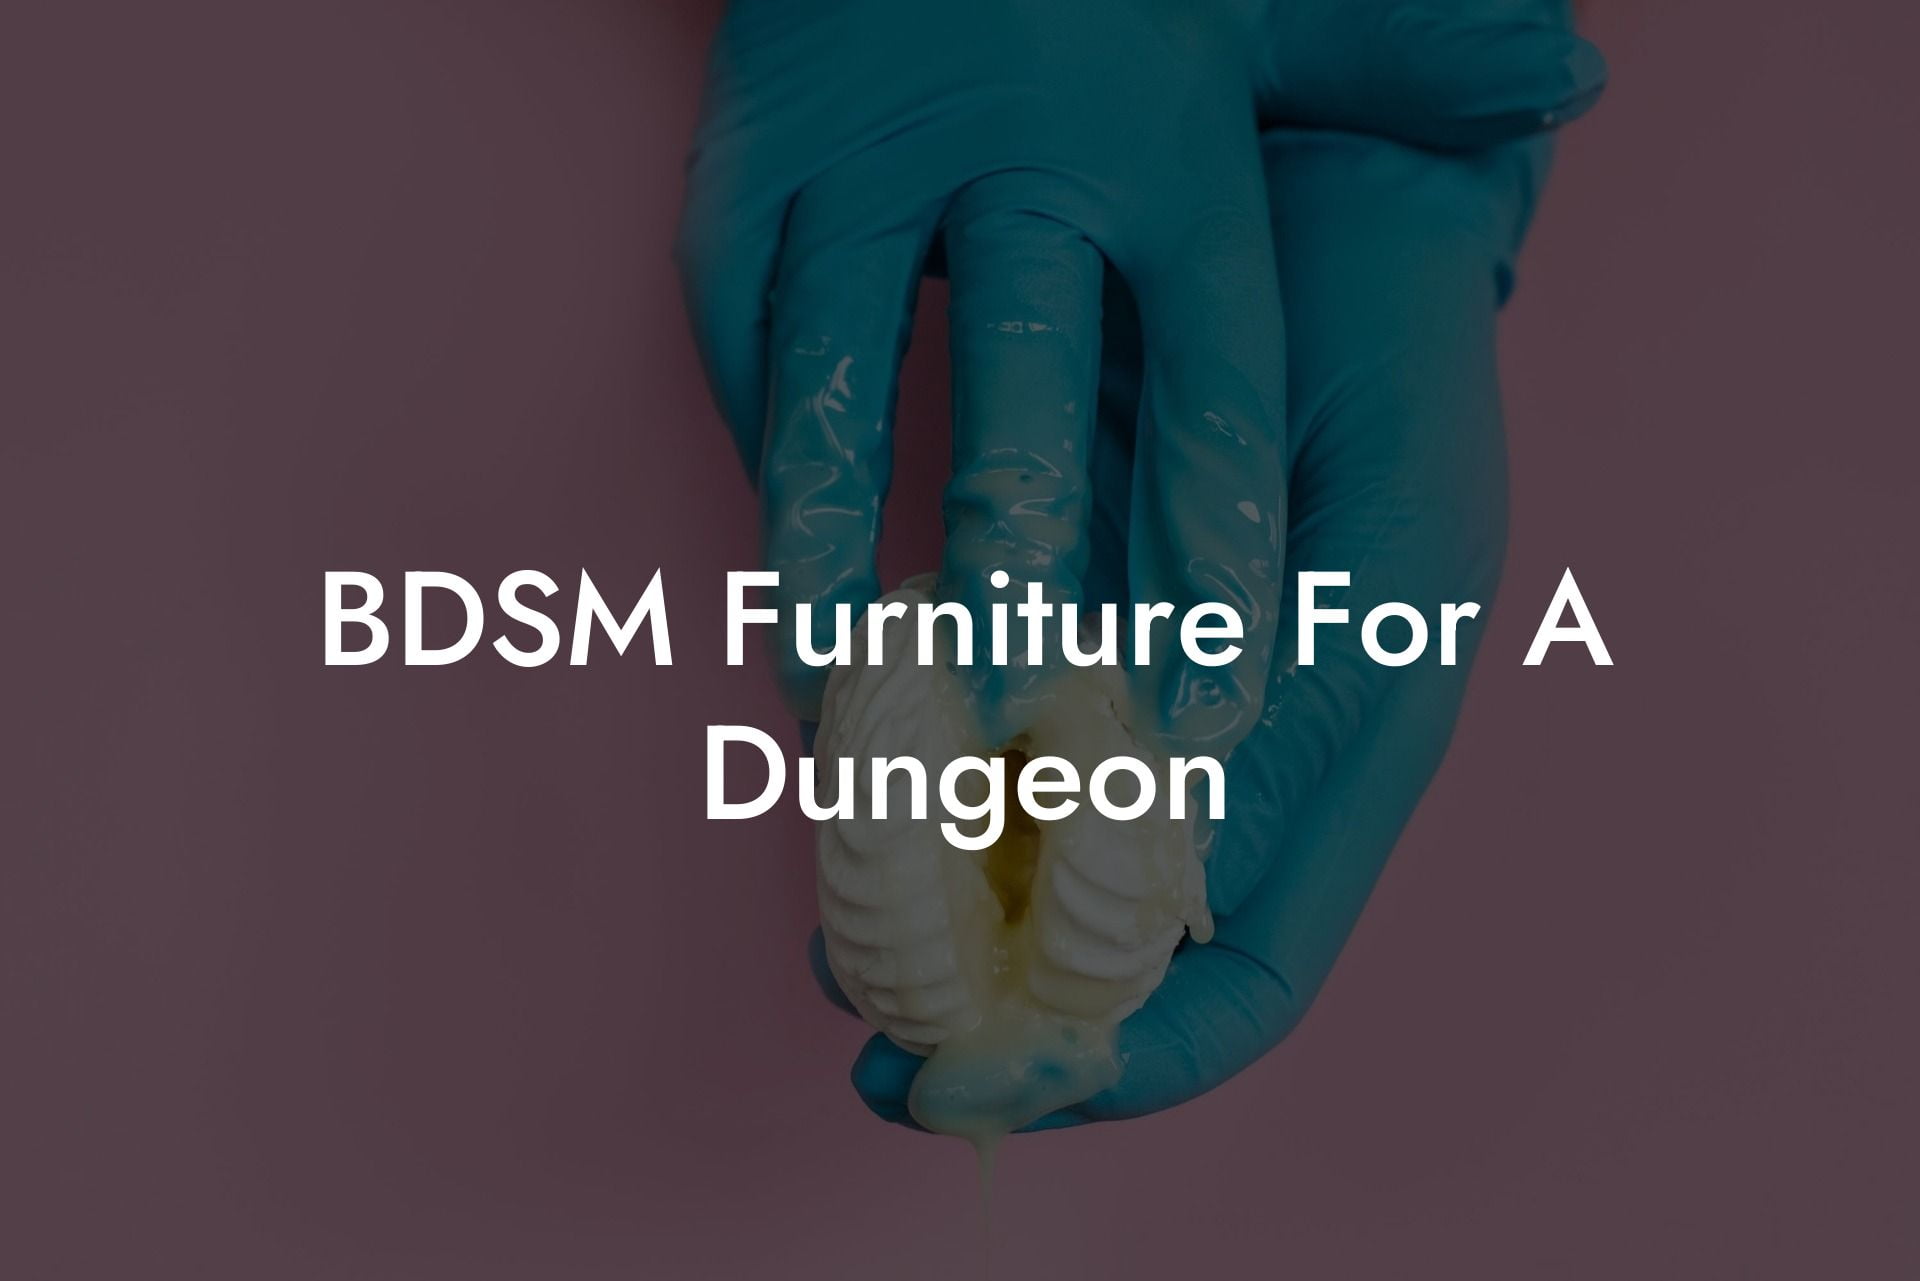 BDSM Furniture For A Dungeon